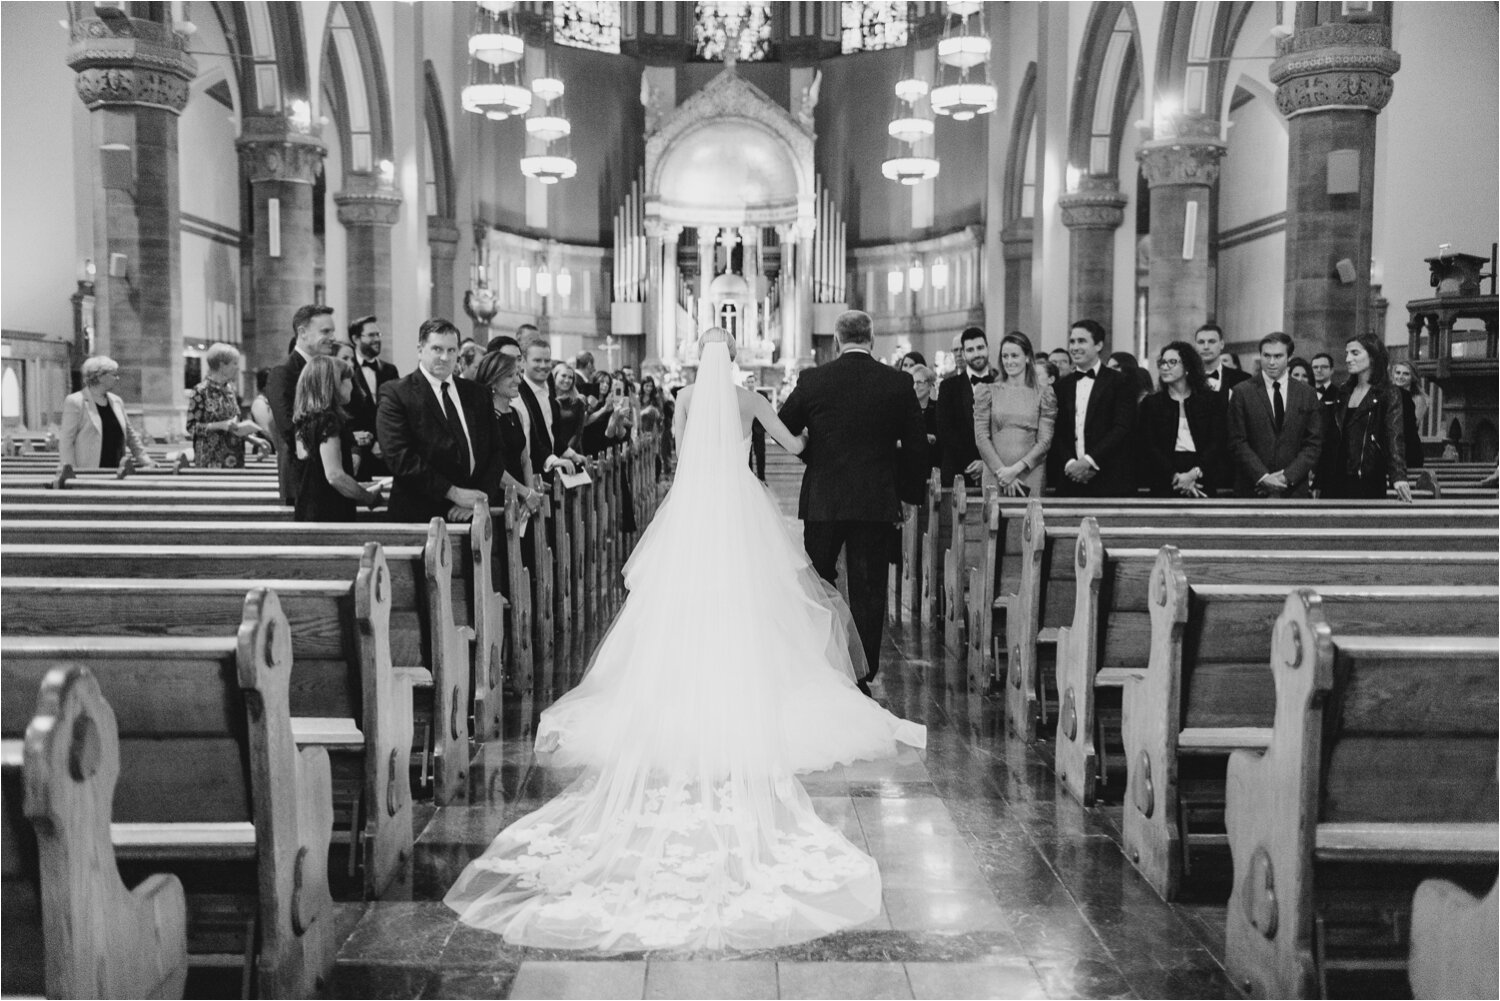 Father and Bride Walking Down Aisle at Church Ceremony